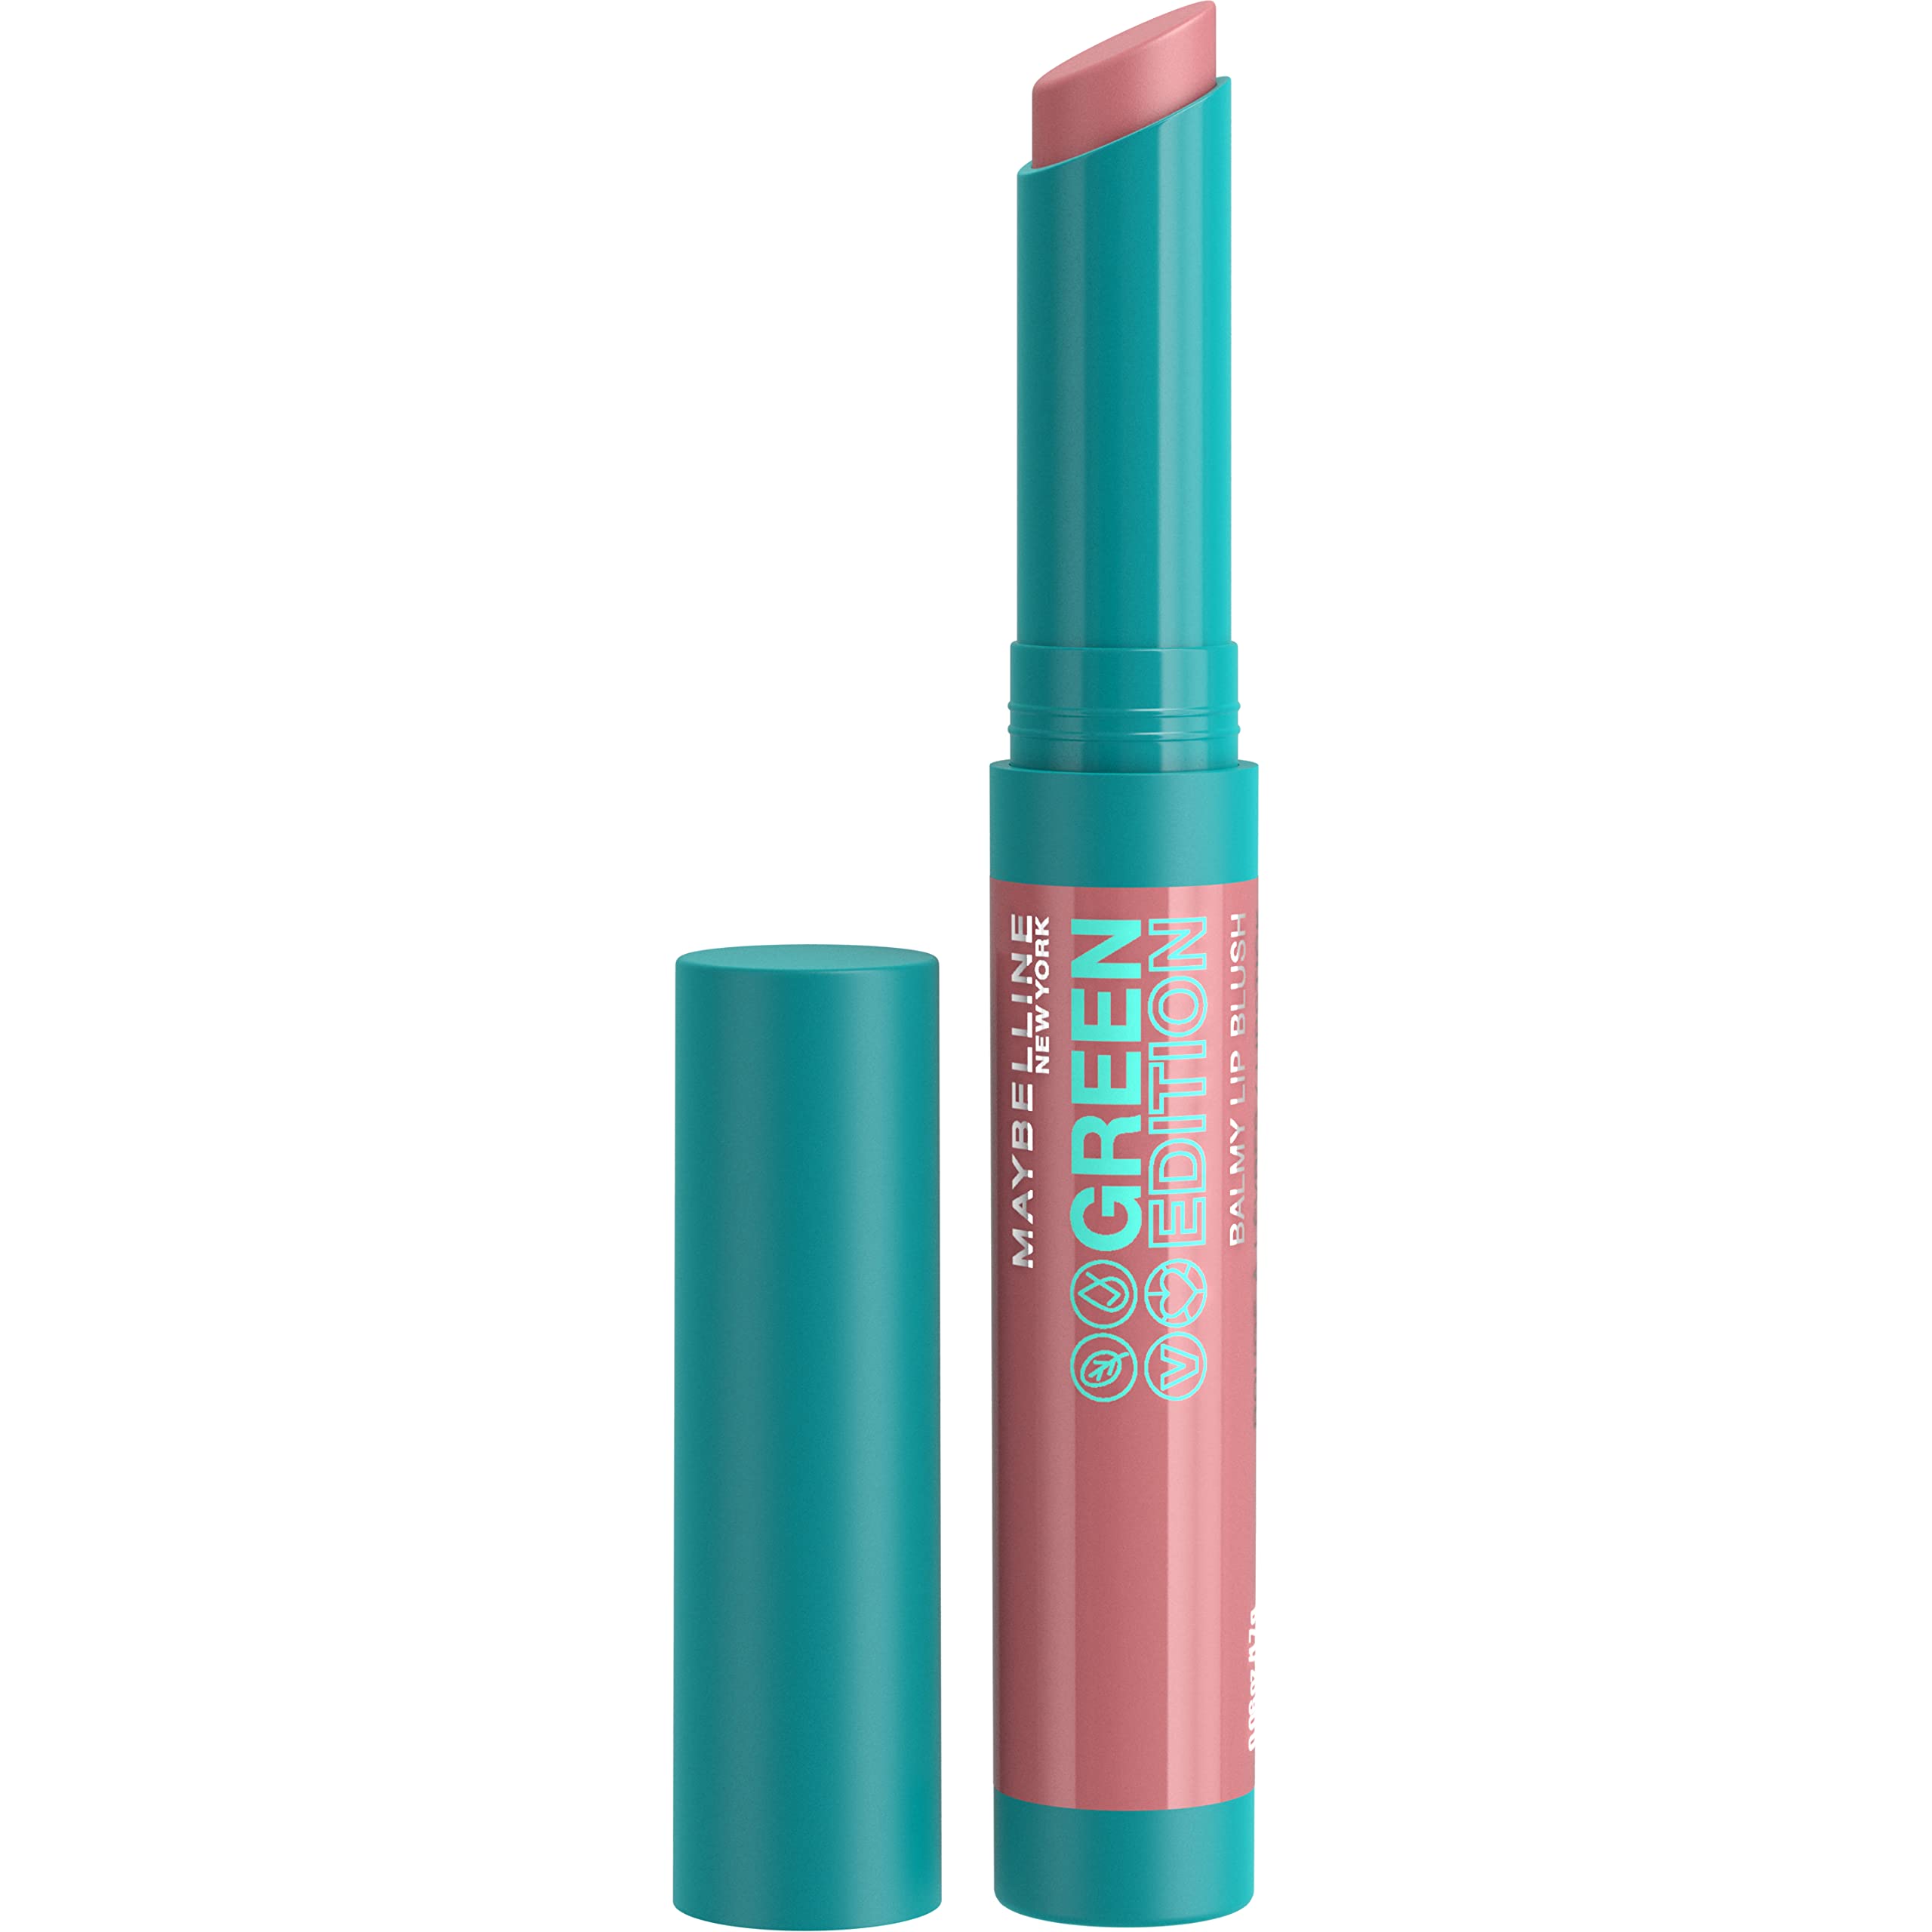 Edition Lip 1 Green Maybelline Blush Moonlight Balmy With Pink Mango Count Oil Nude Formulated